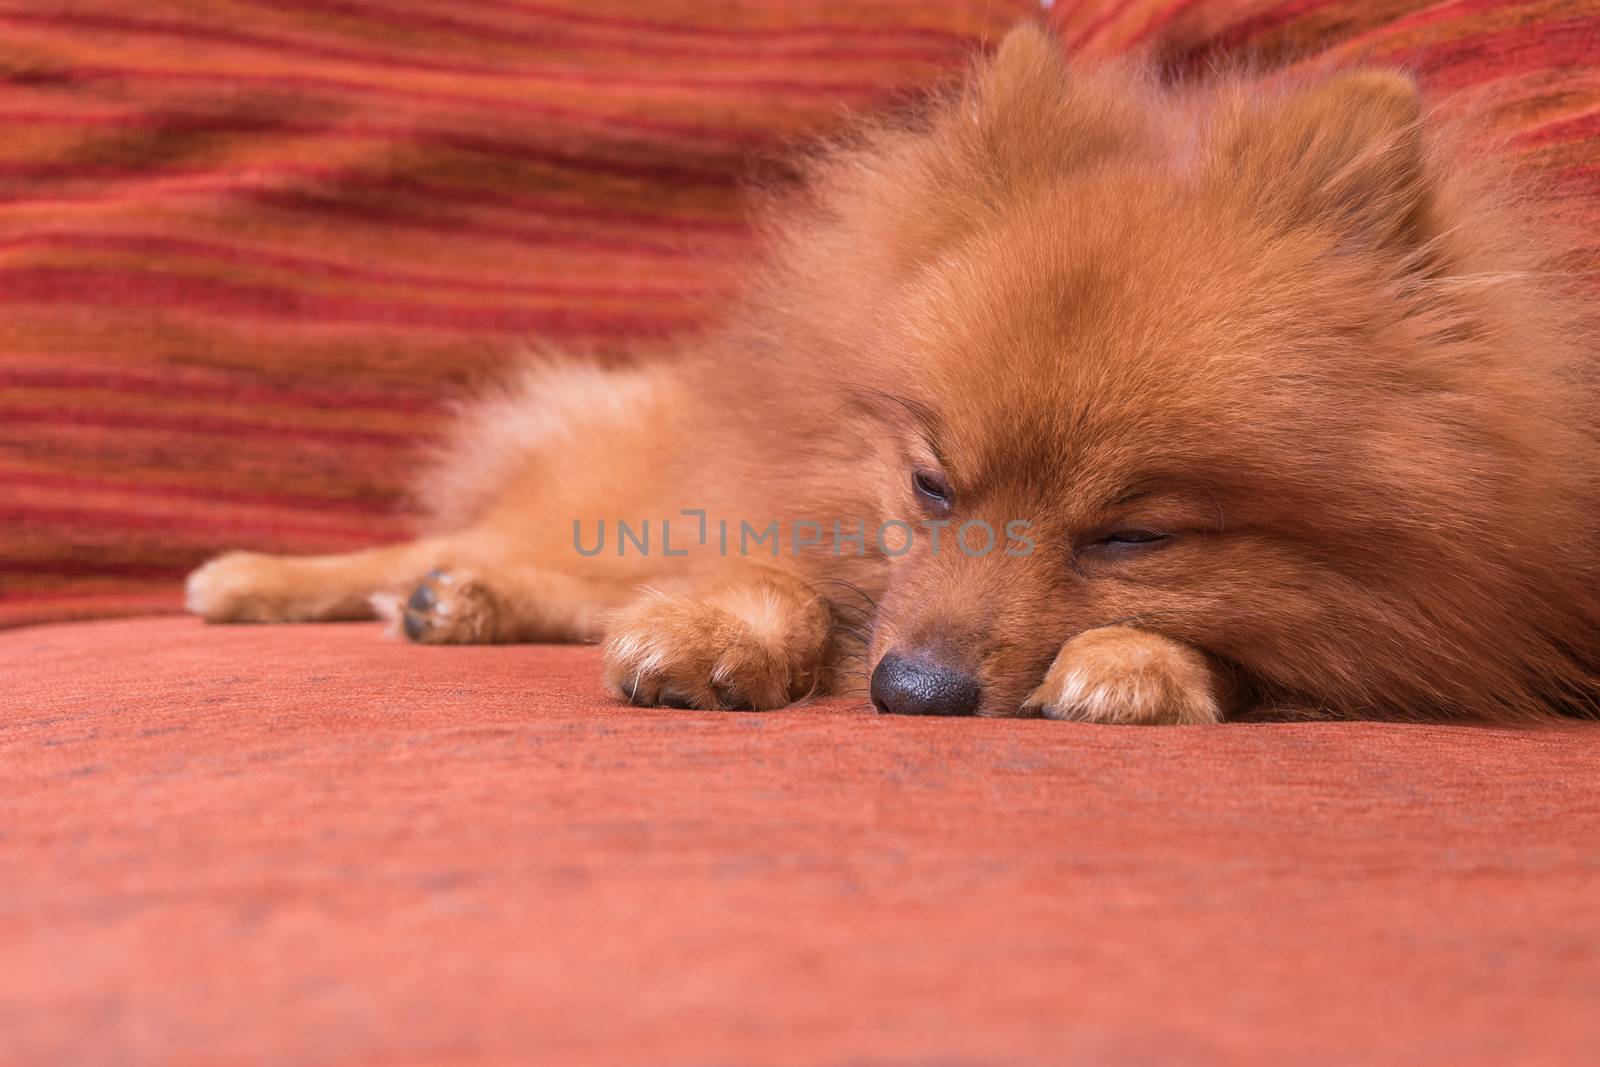 Pomeranian dog in hair shed period, sleeping on the sofa, focus on the eye